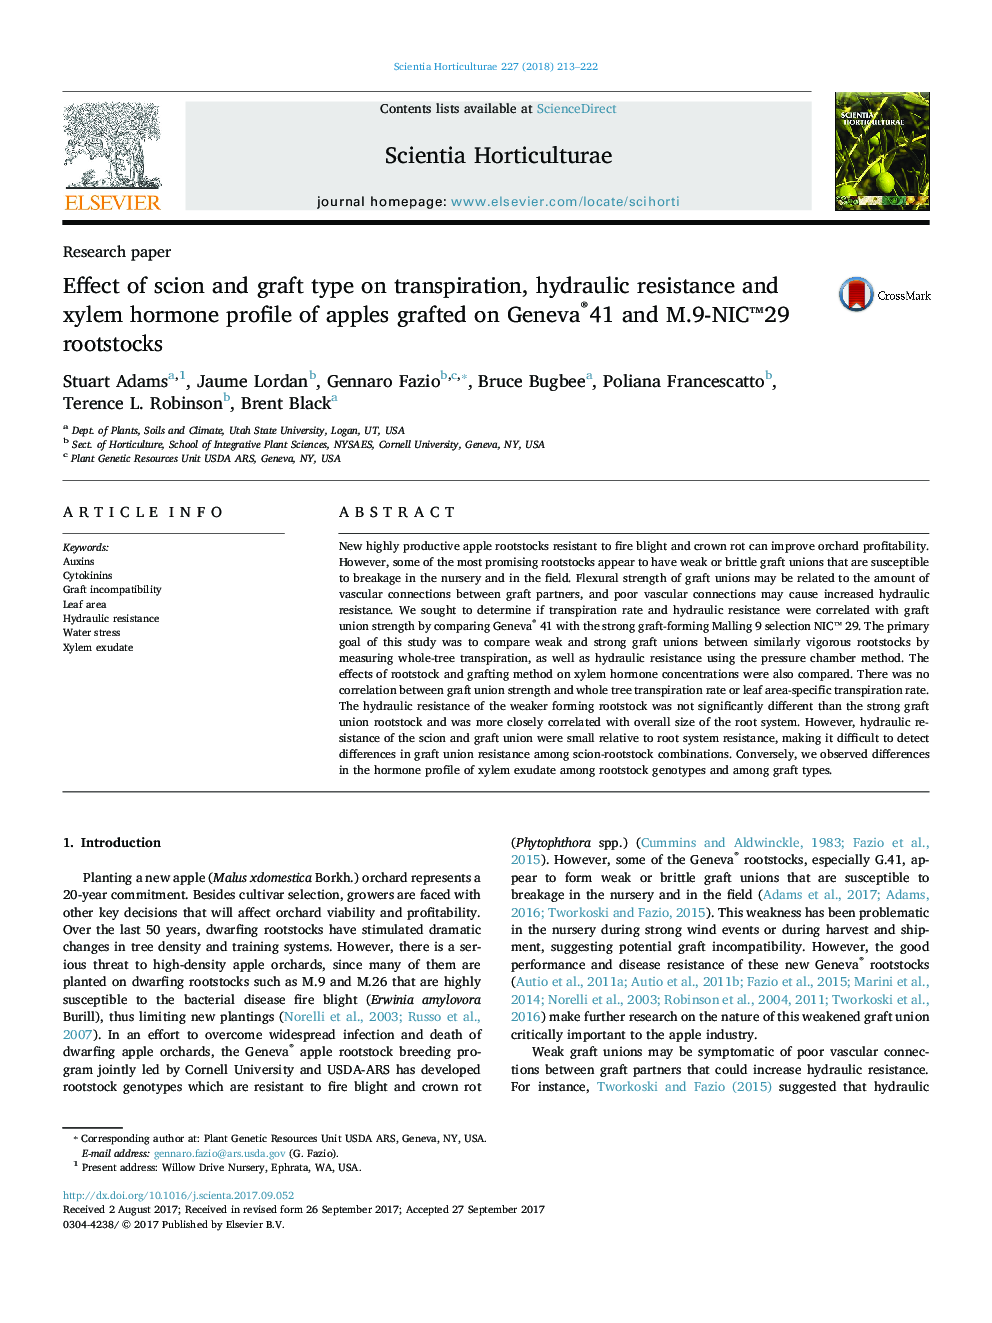 Research paperEffect of scion and graft type on transpiration, hydraulic resistance and xylem hormone profile of apples grafted on Geneva®41 and M.9-NICâ¢29 rootstocks